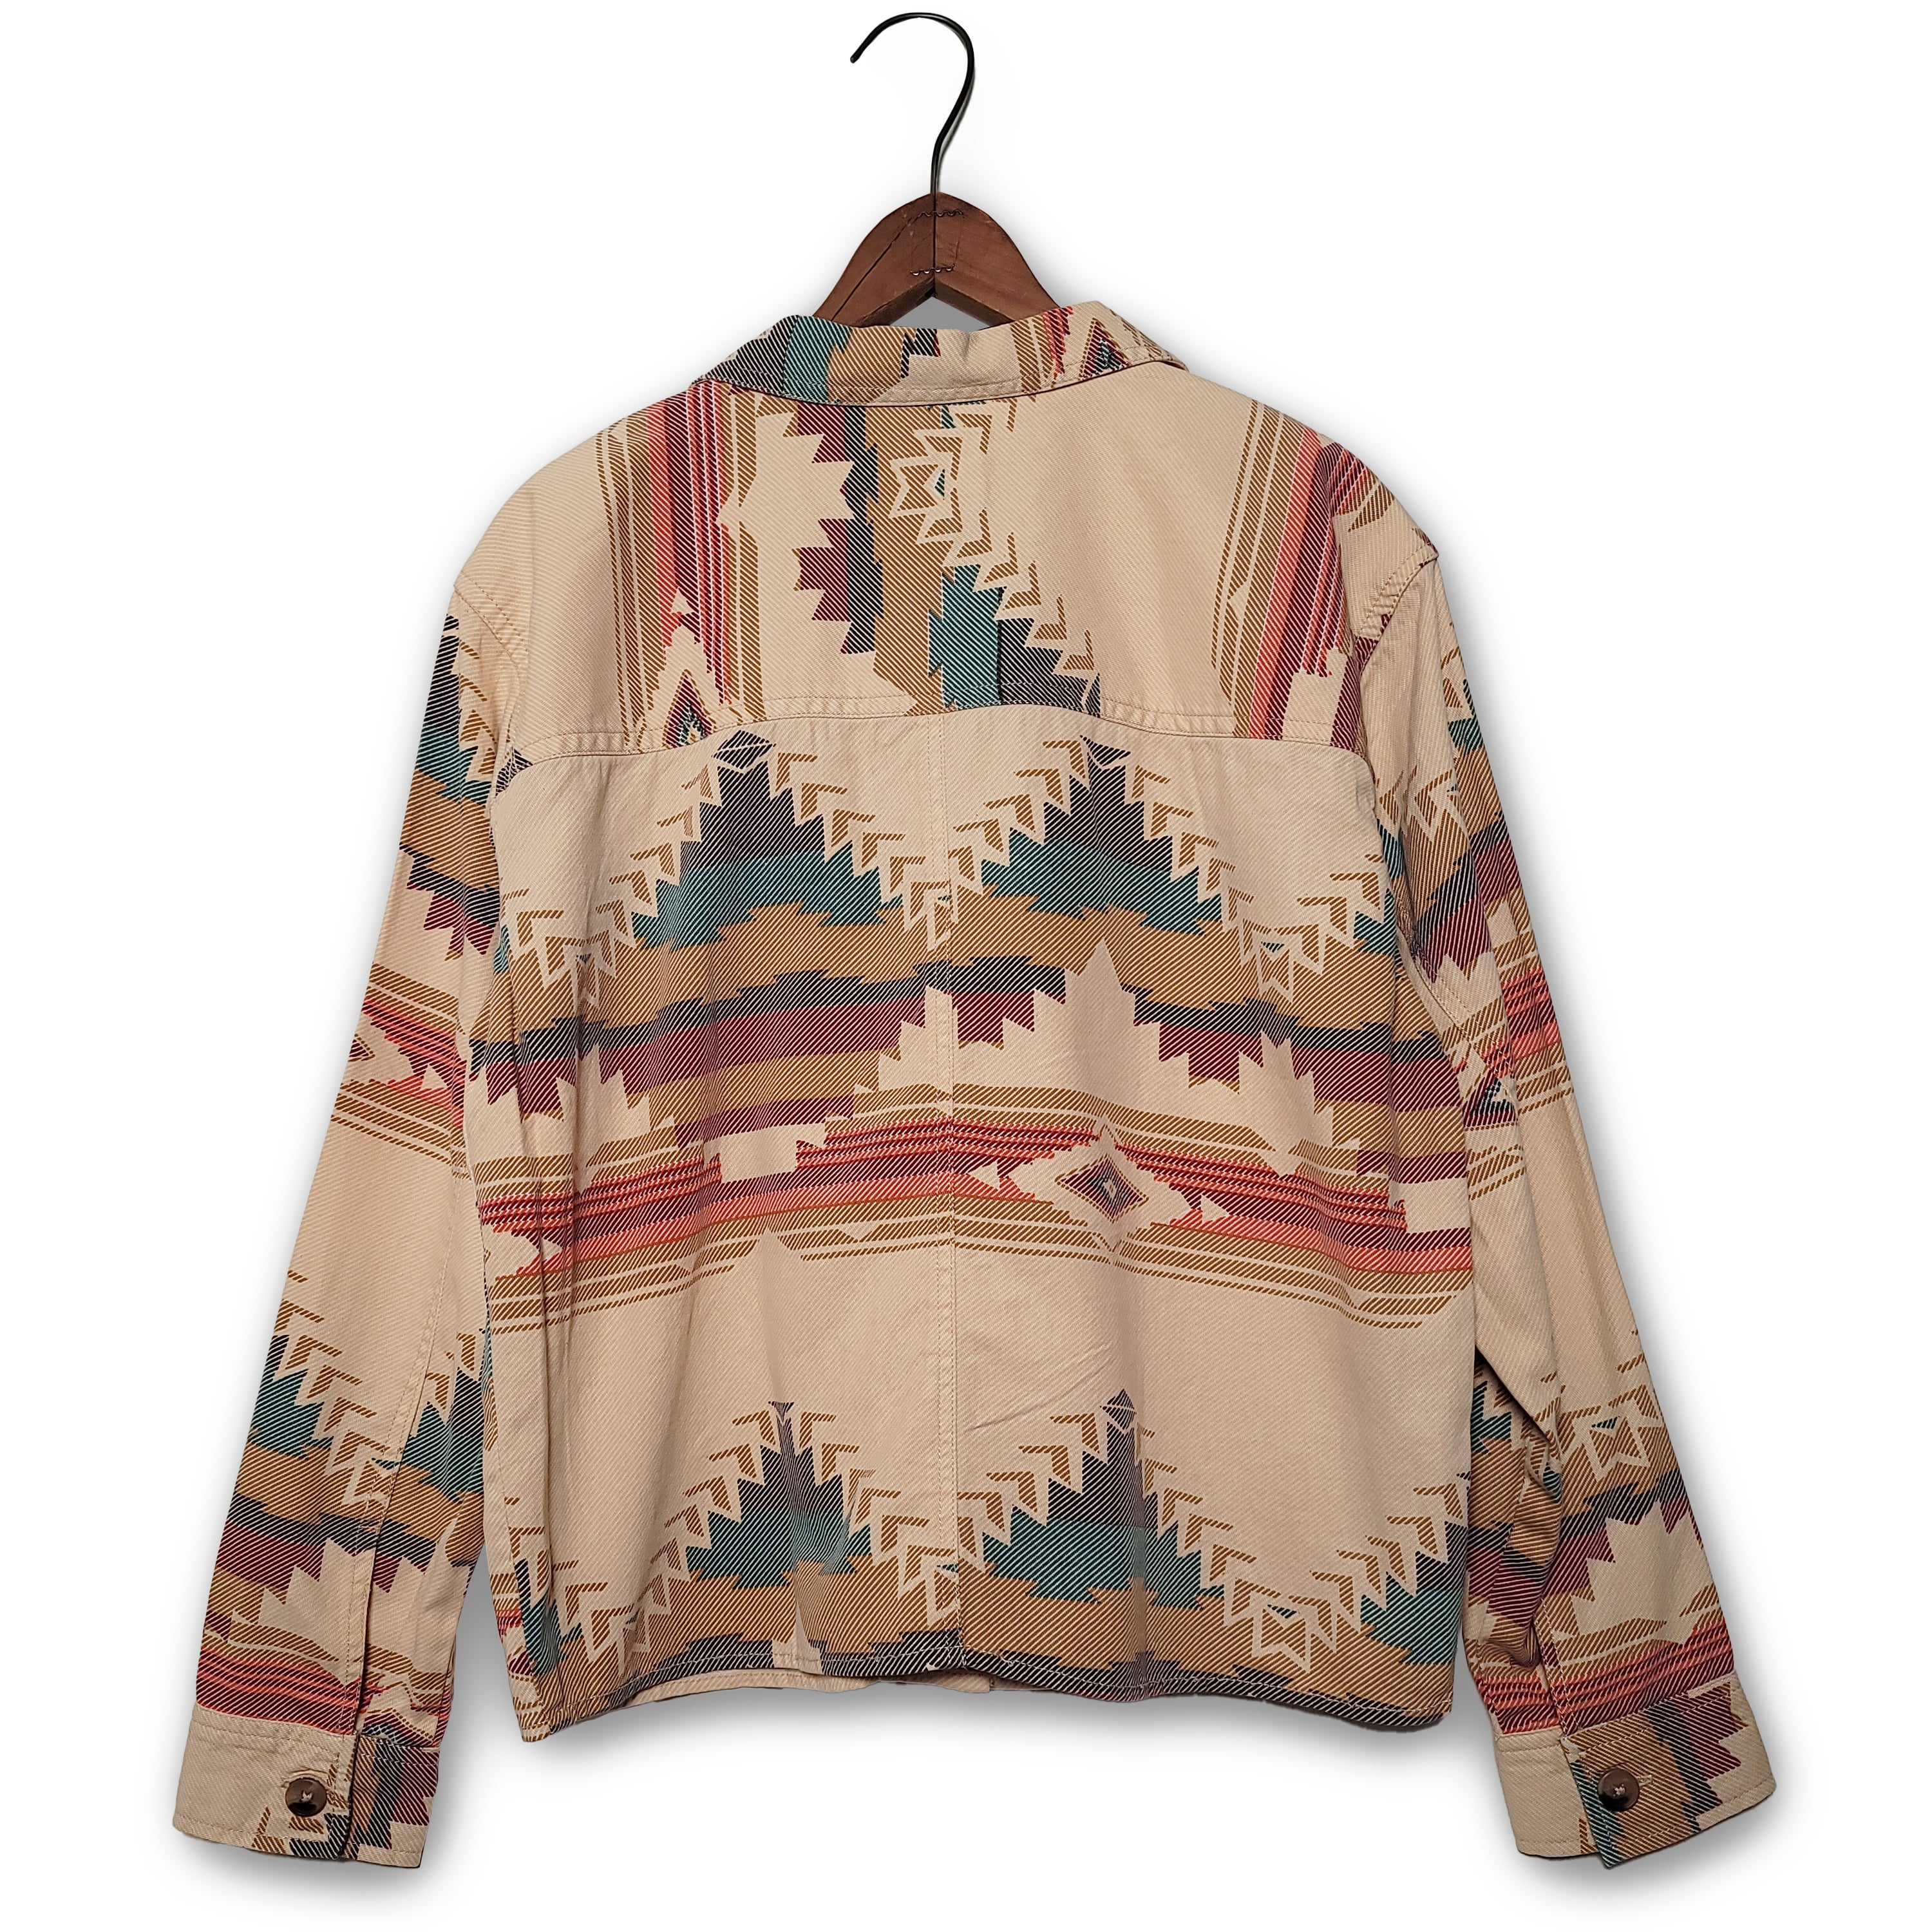 Aztec Inspired Jacket by Cotton & Rye #CRJ943M